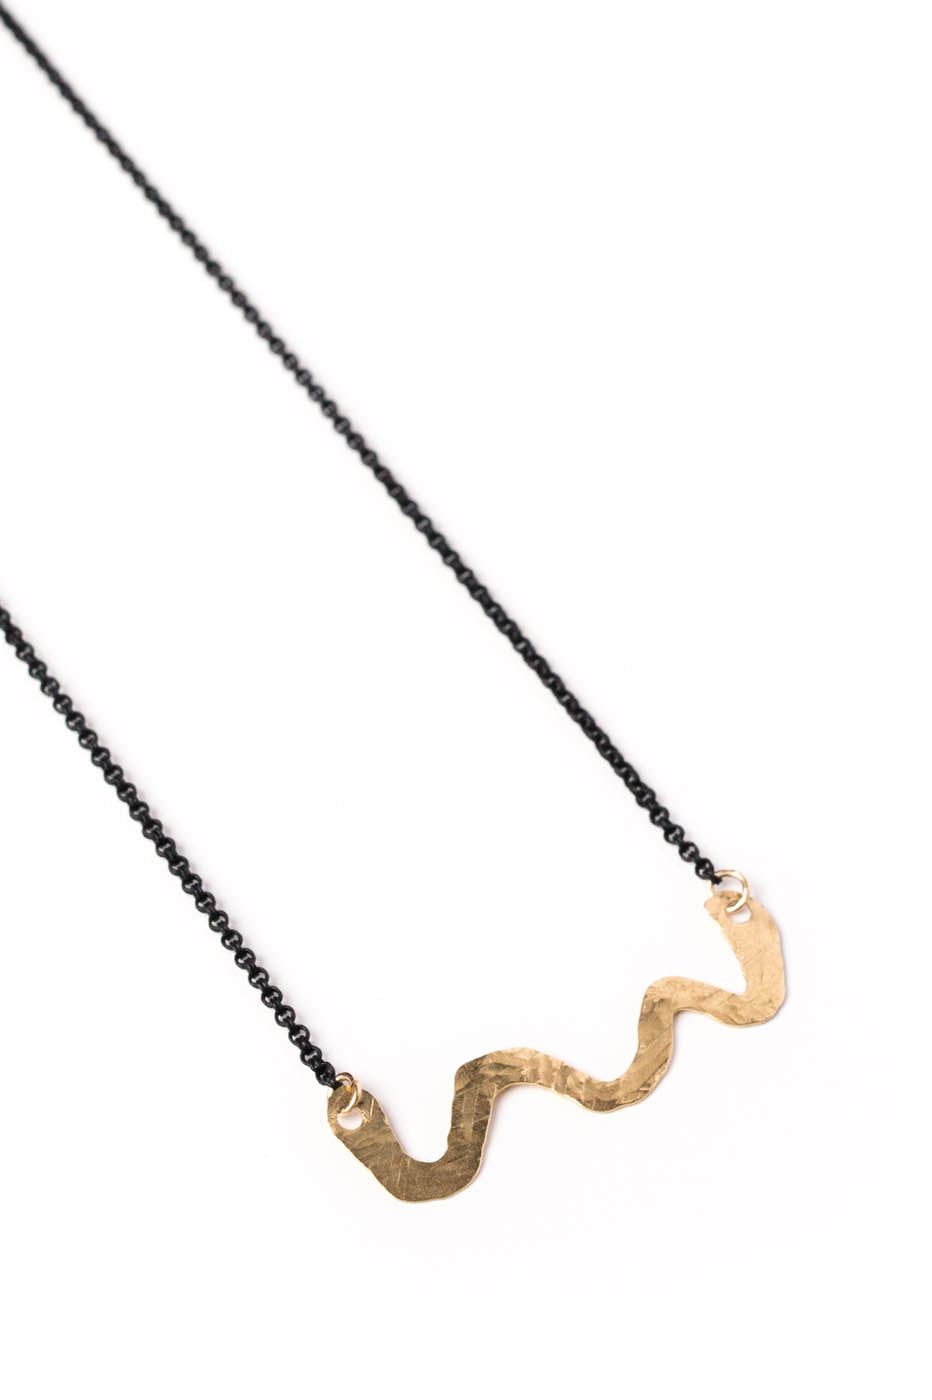 Hand Forged Brass Swiggle Necklace on a Black Chain (closeup)